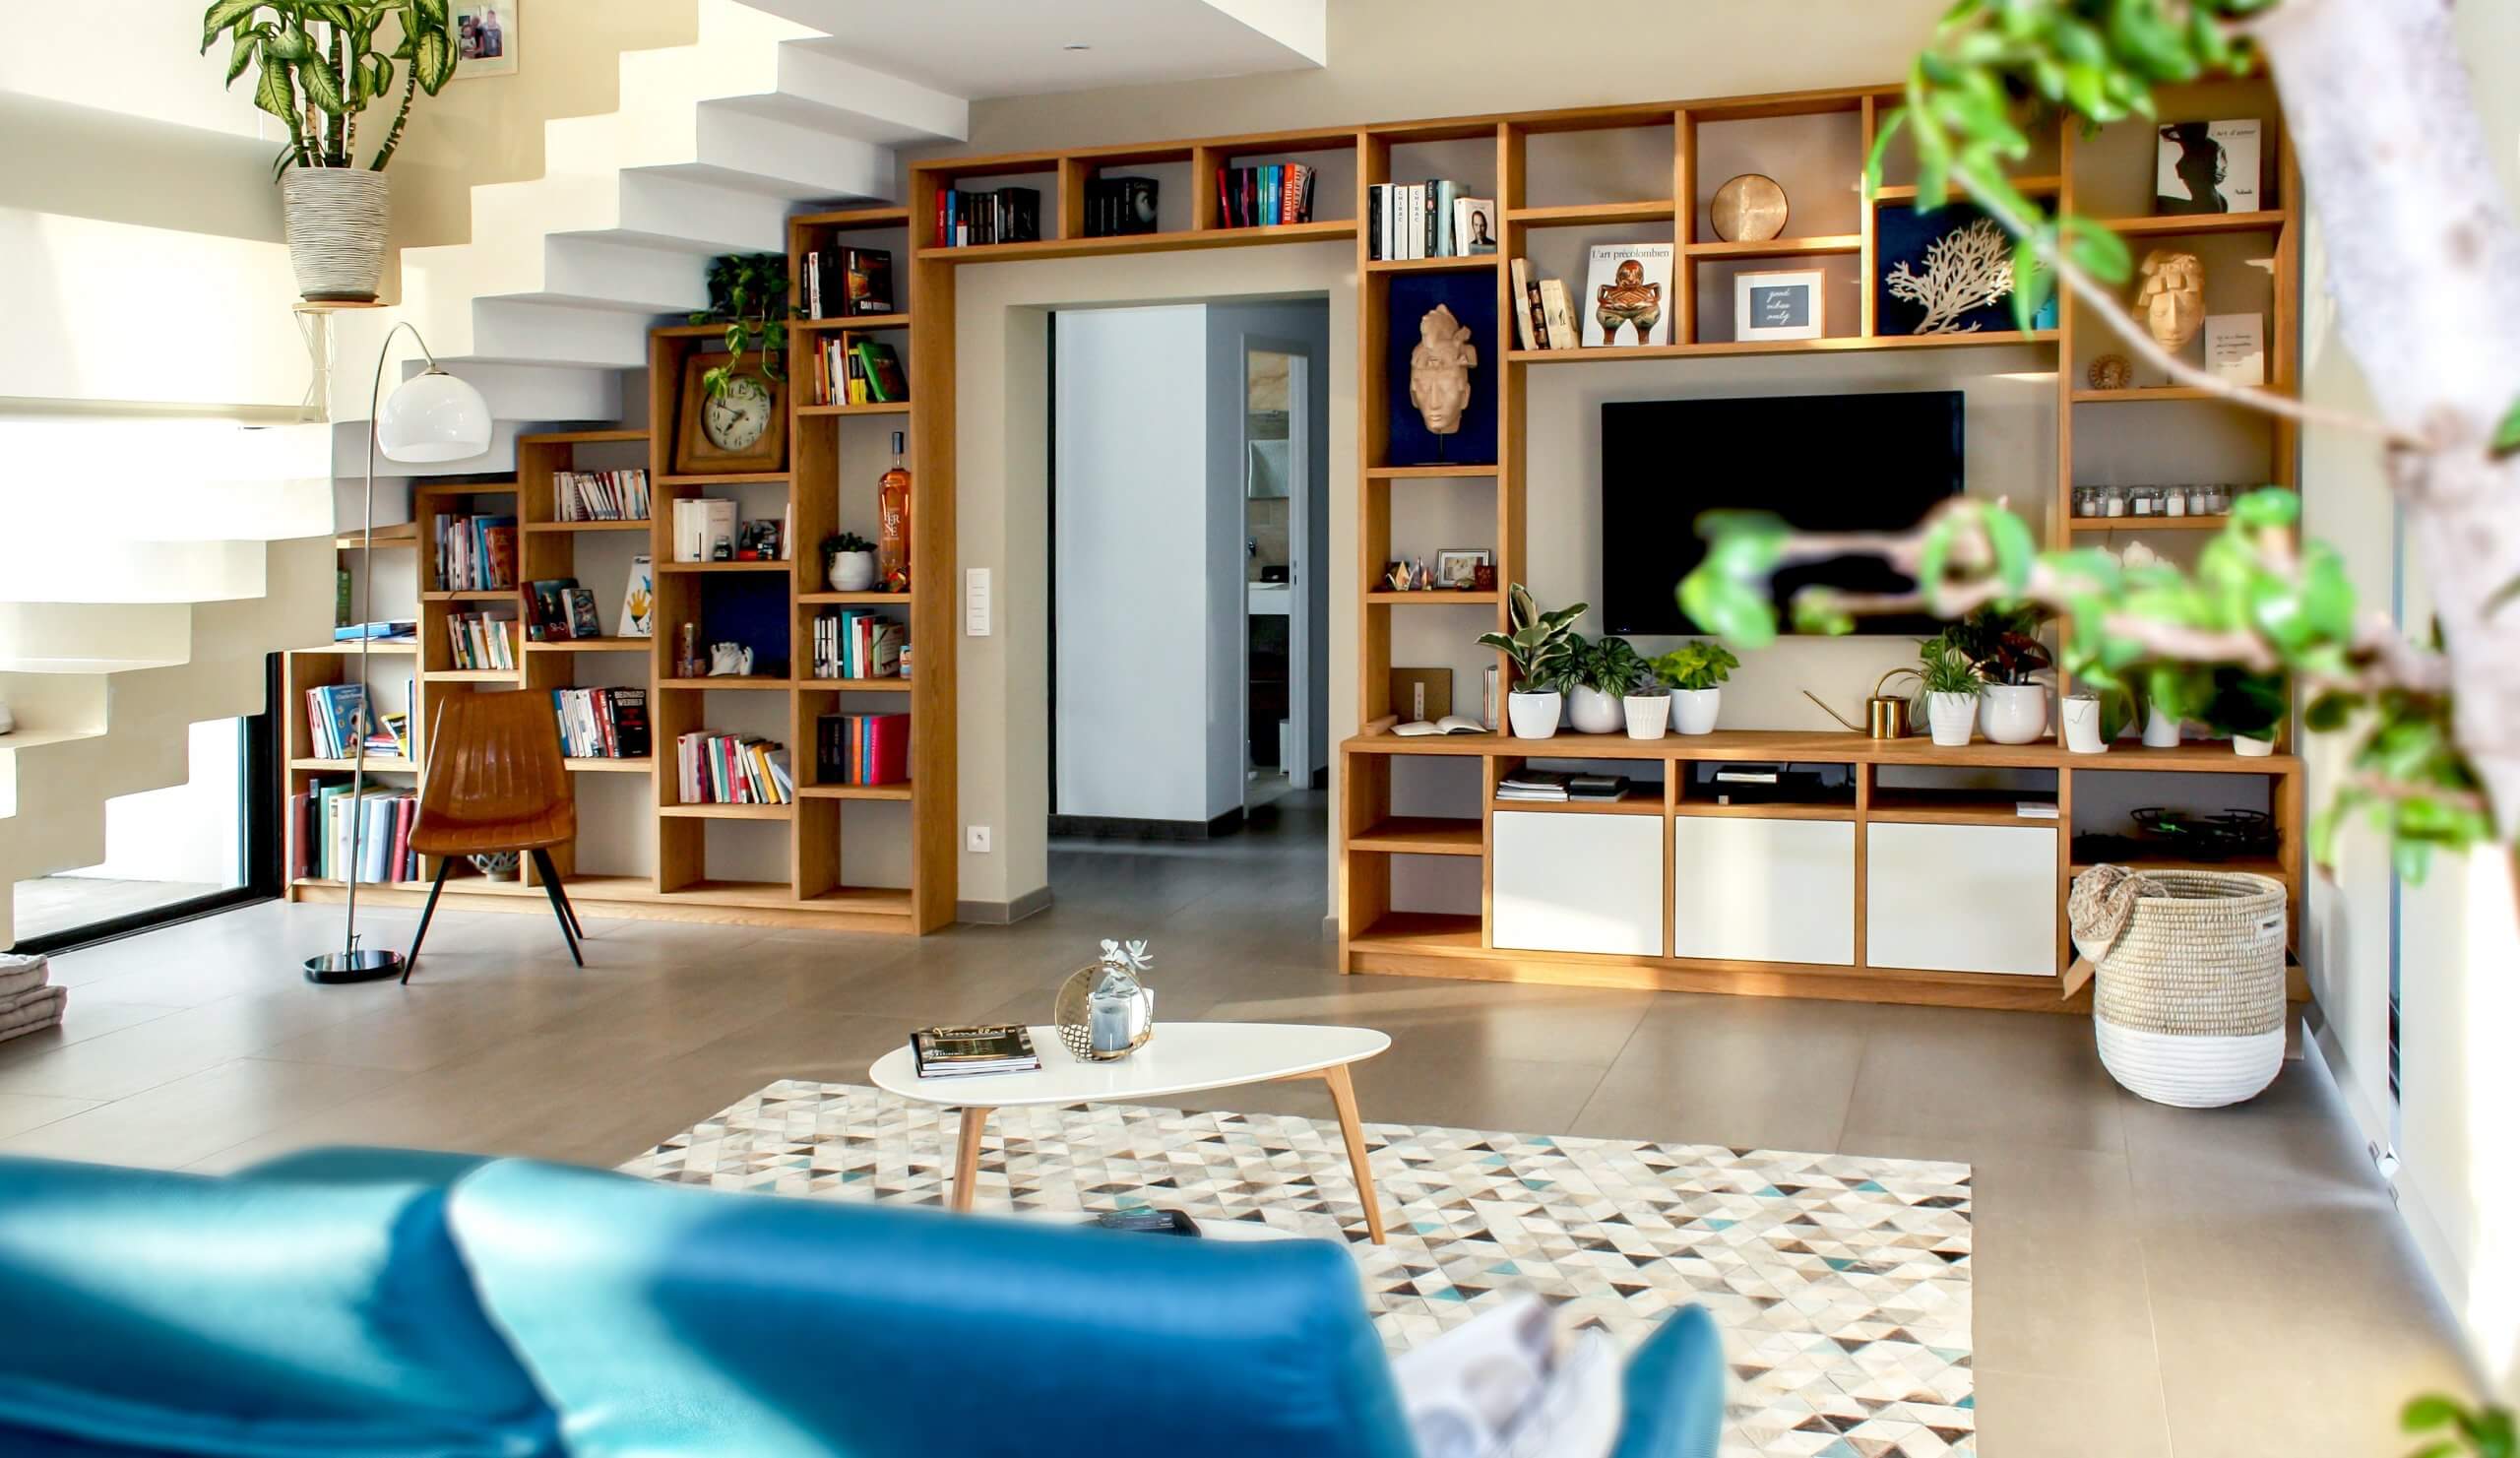 Modern interiors: Incorporate the Eco-friendly, versatile, and flexible materials | MessHall